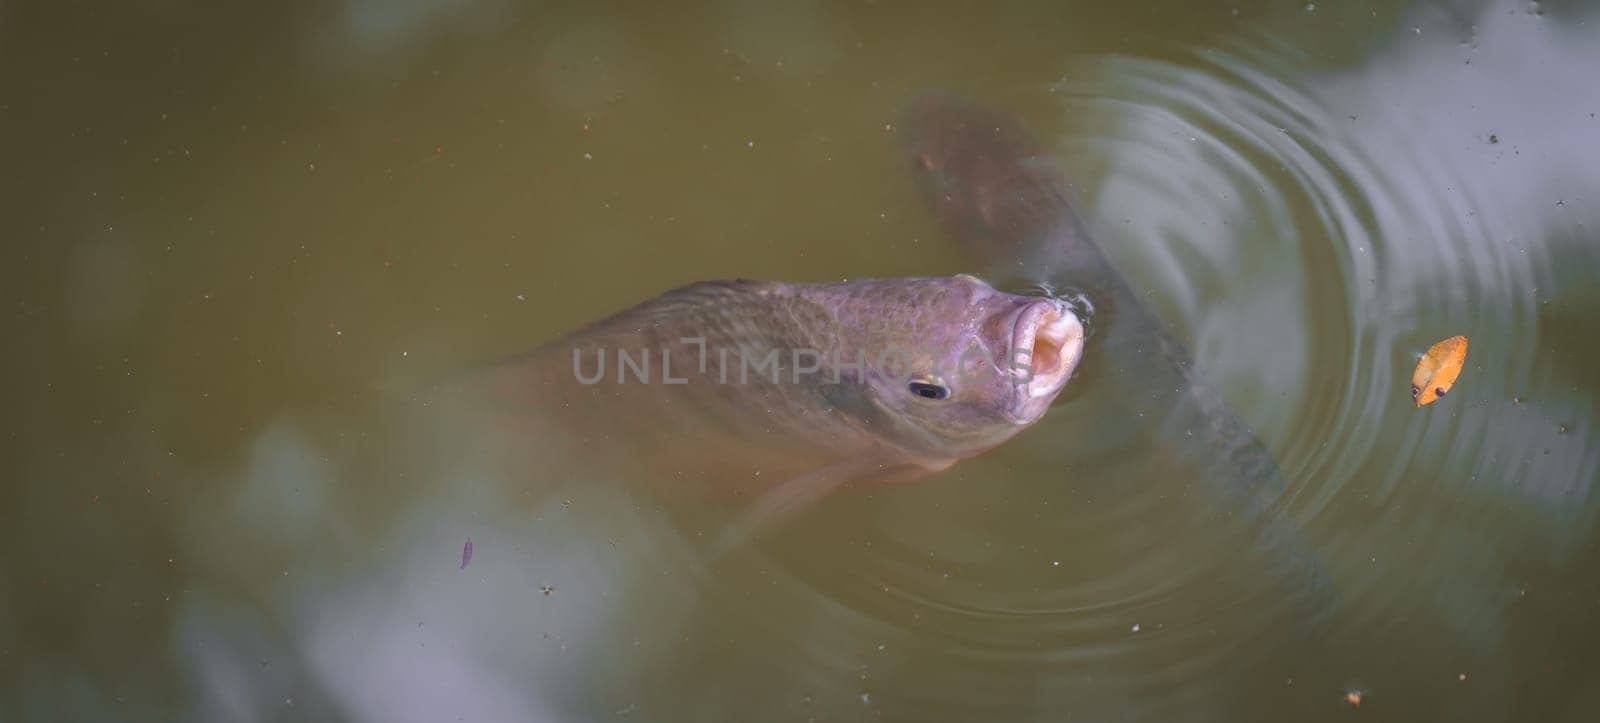 A colorful fish in its natural habitat opens its mouth underwater, anticipating a meal. However, it is surprised to find a dry leaf instead. The image provides space for text.